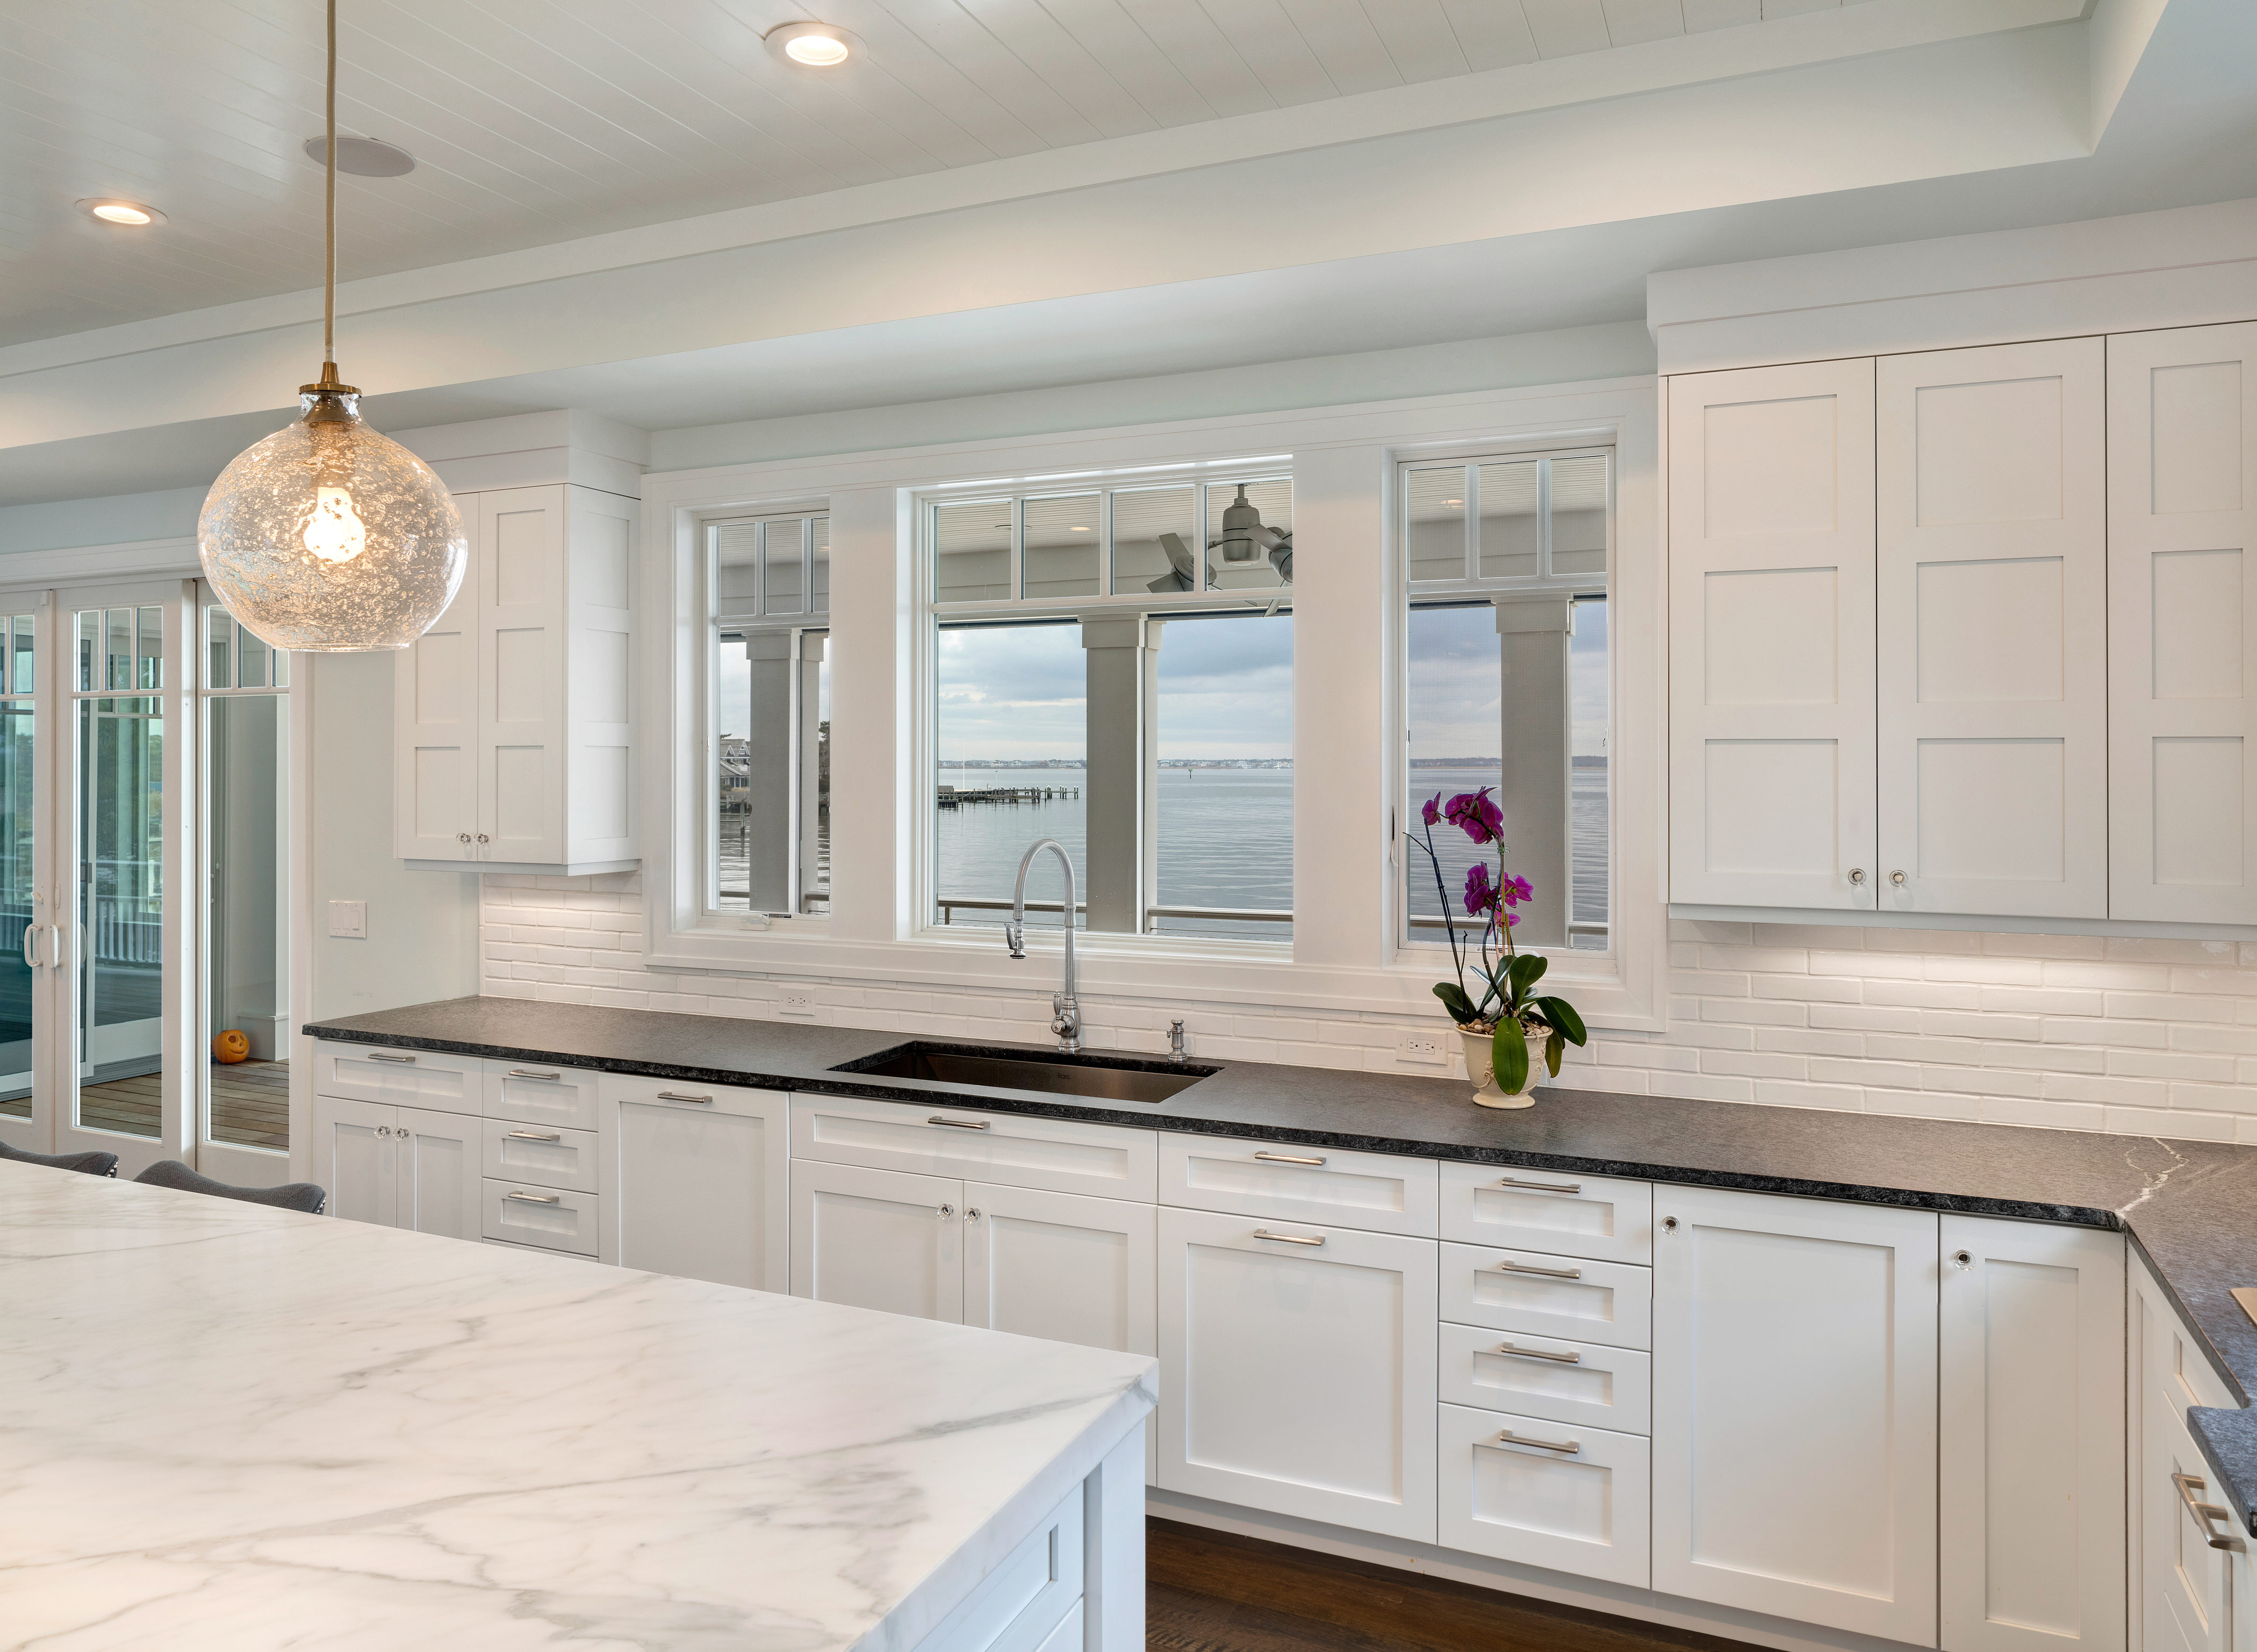 Pictures Of Remodeled Kitchens With White Cabinets Image To U